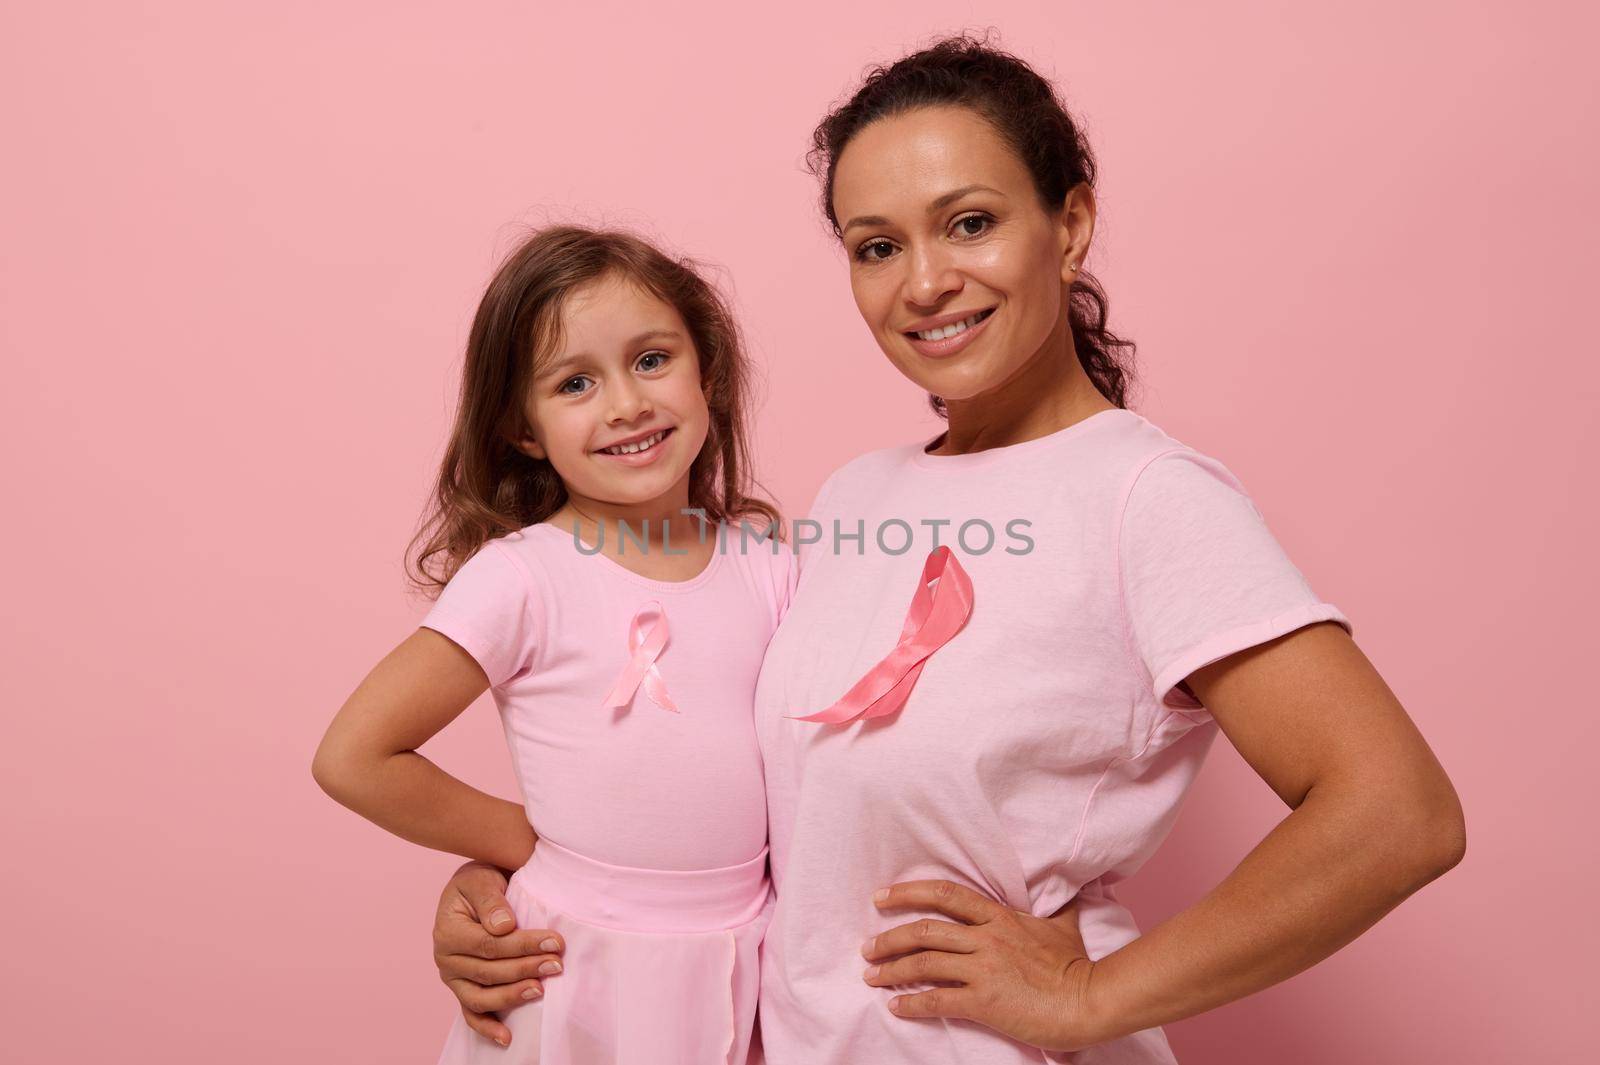 Isolated portrait on colored background with copy space of mixed race woman hugging her cute baby girl, wearing pink clothes and breast cancer awareness ribbon showing solidarity with cancer survivors by artgf